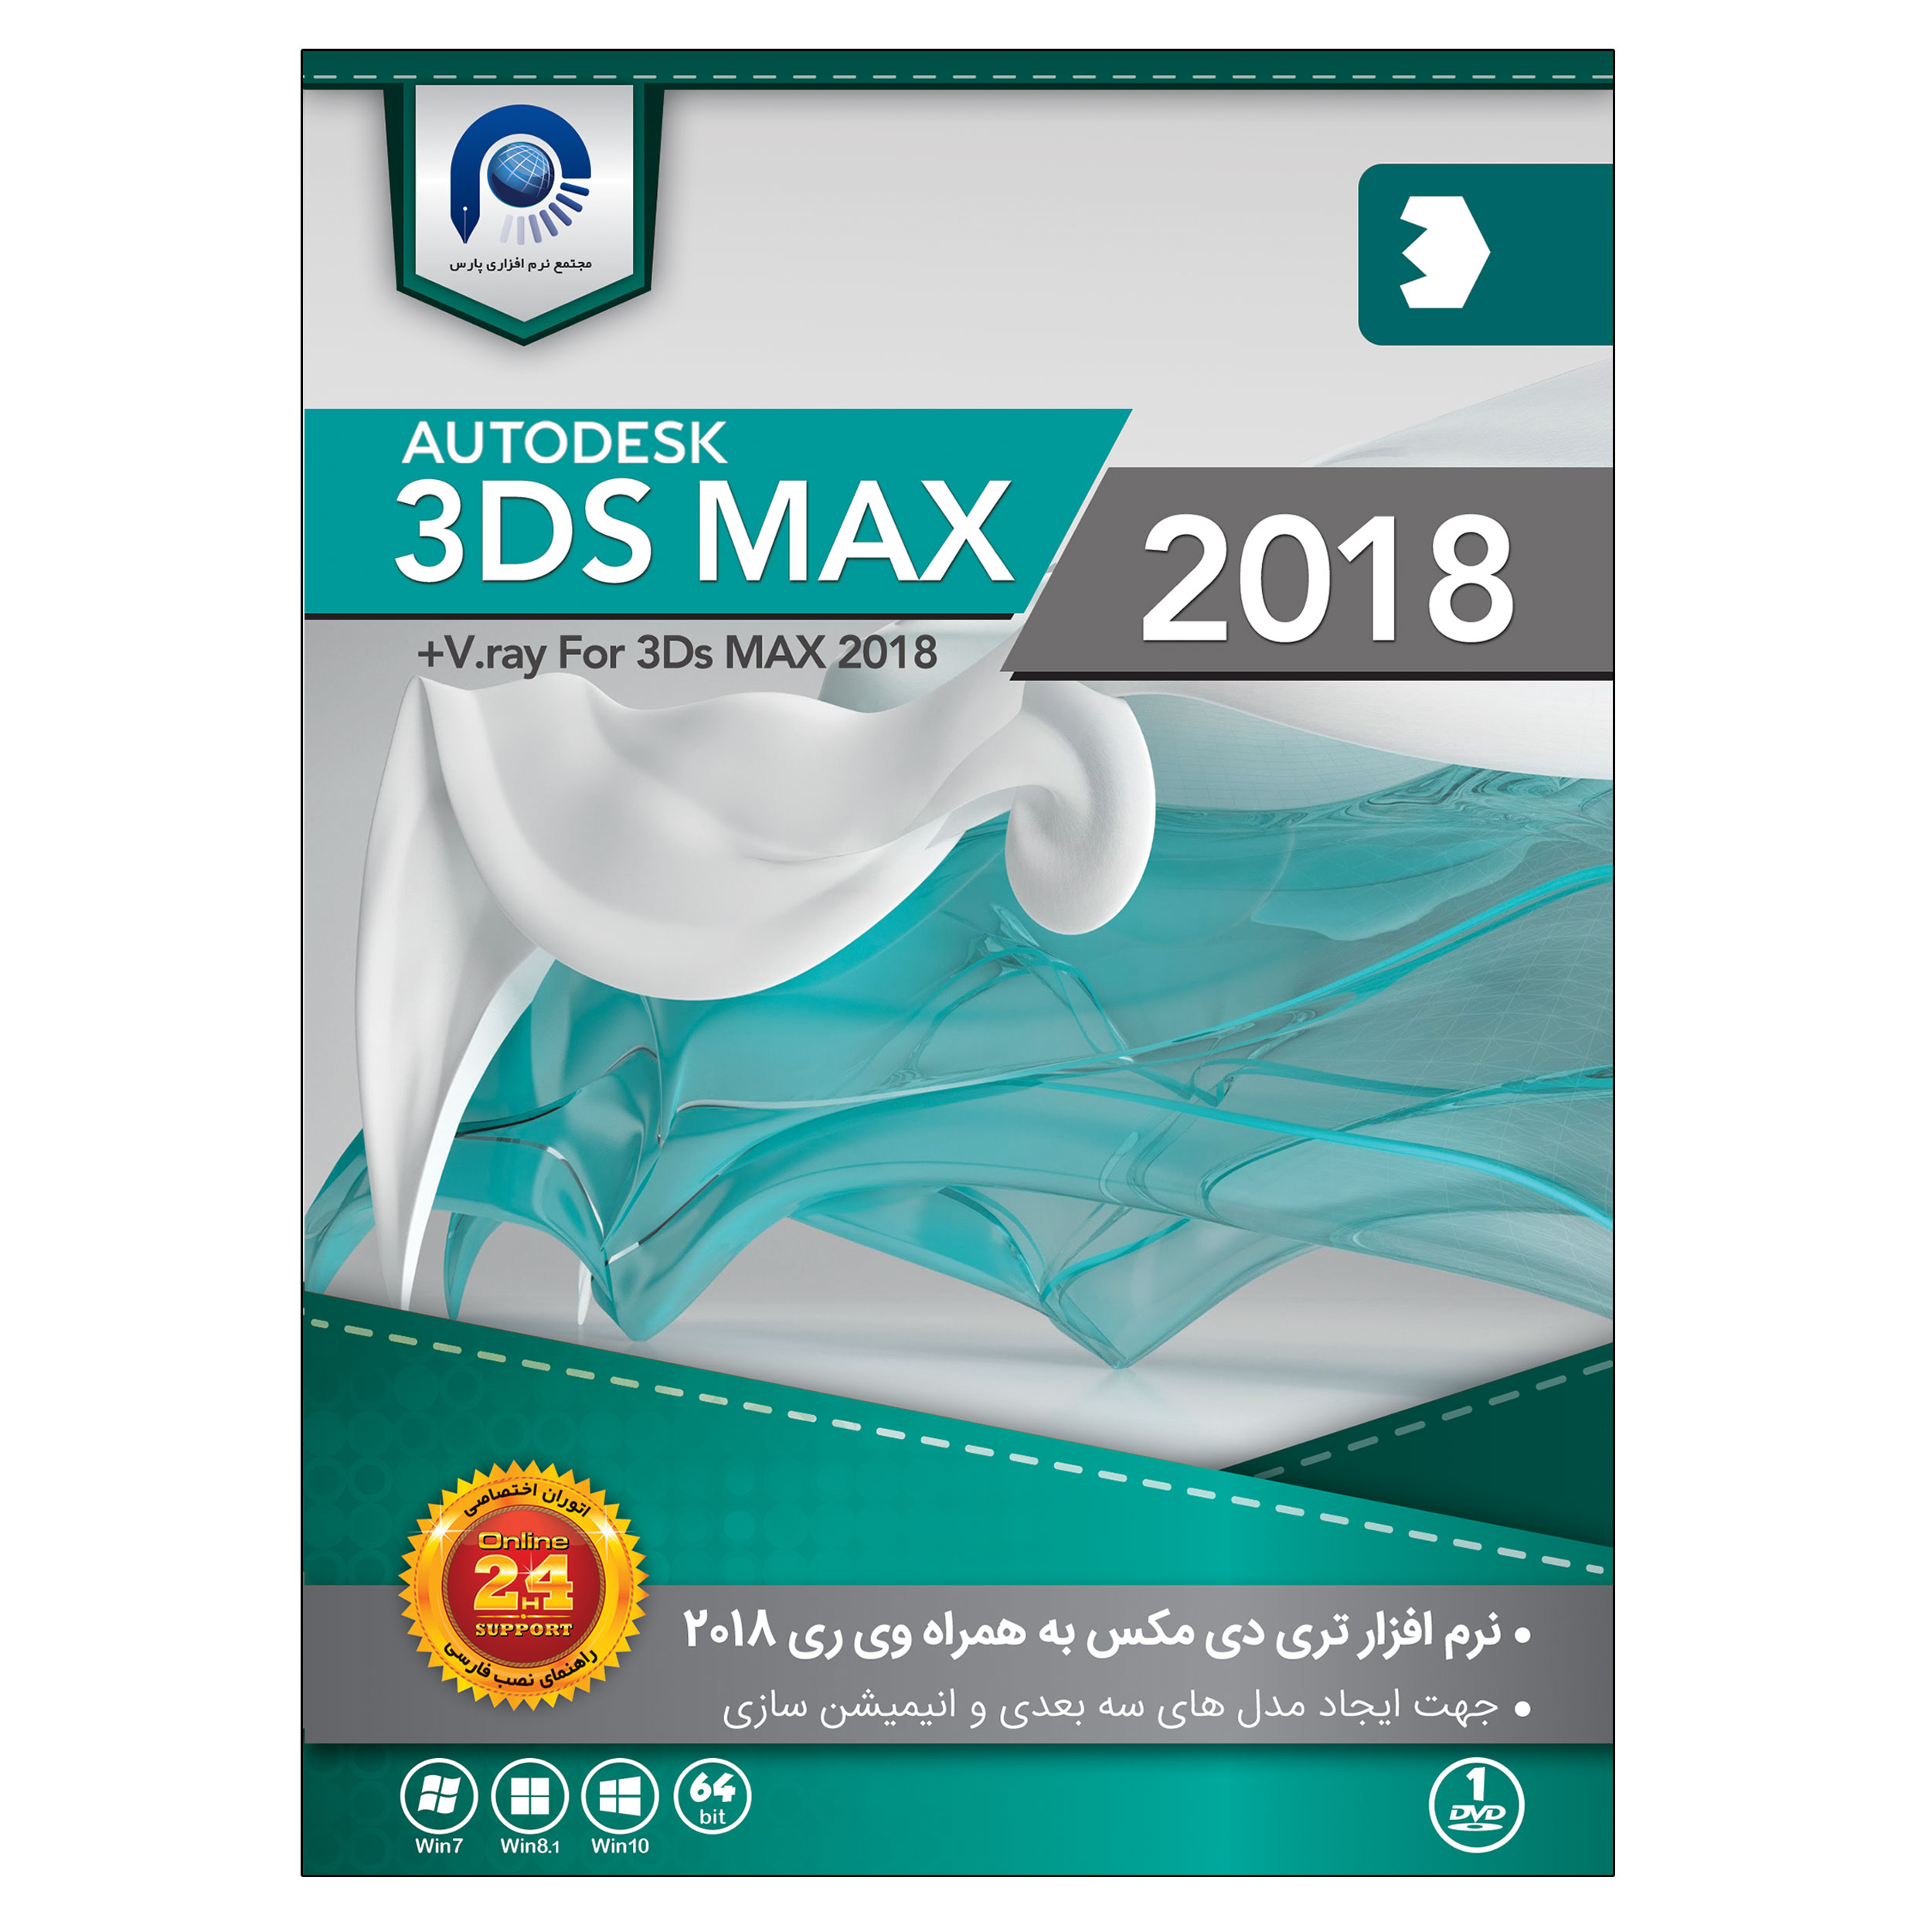 vray 3ds max 2018